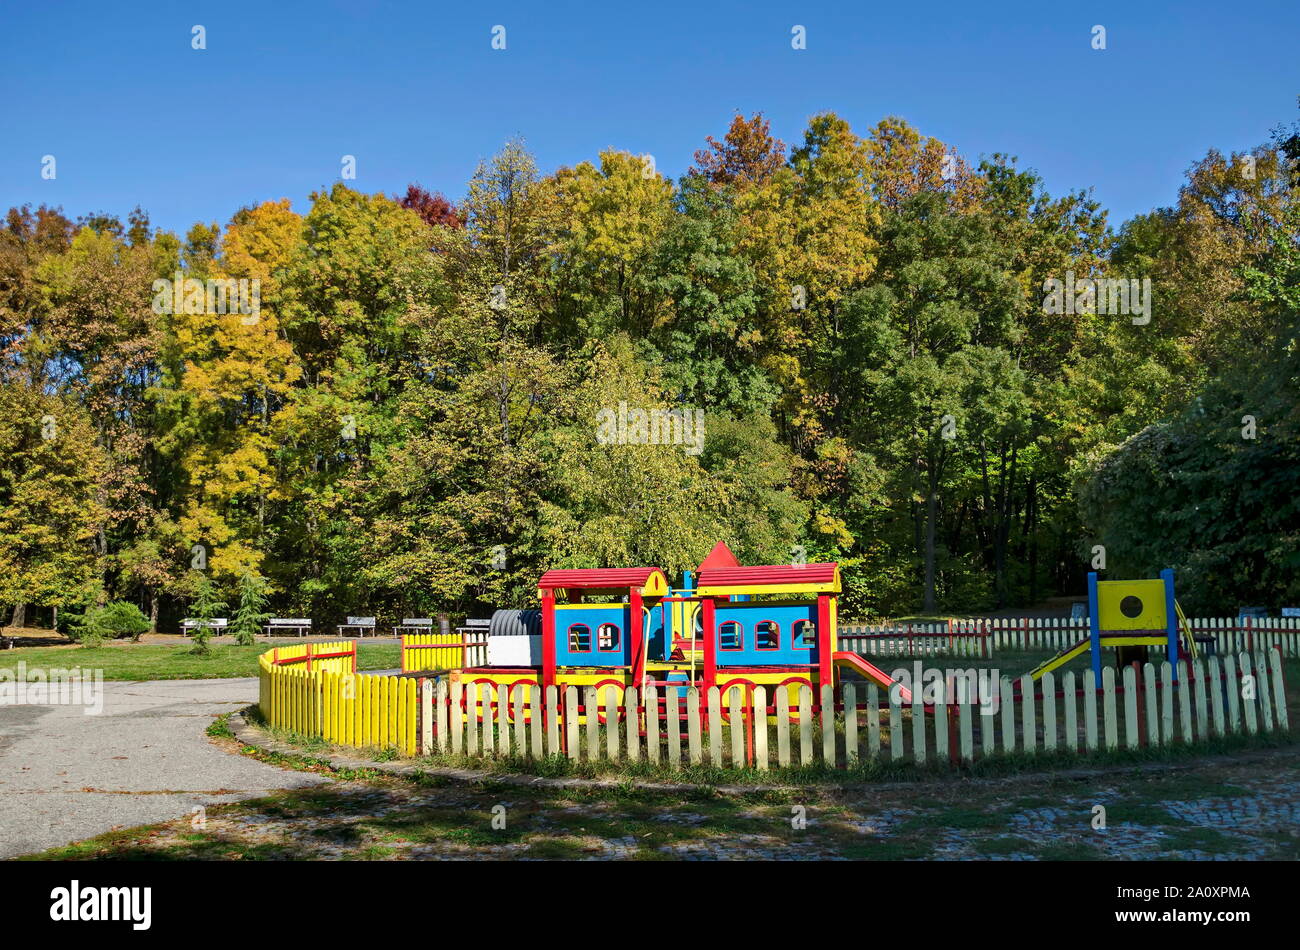 Autumn view of a children's playground in a natural forest with a wooden railway and an outdoor slide, South Park, Sofia, Bulgaria Stock Photo